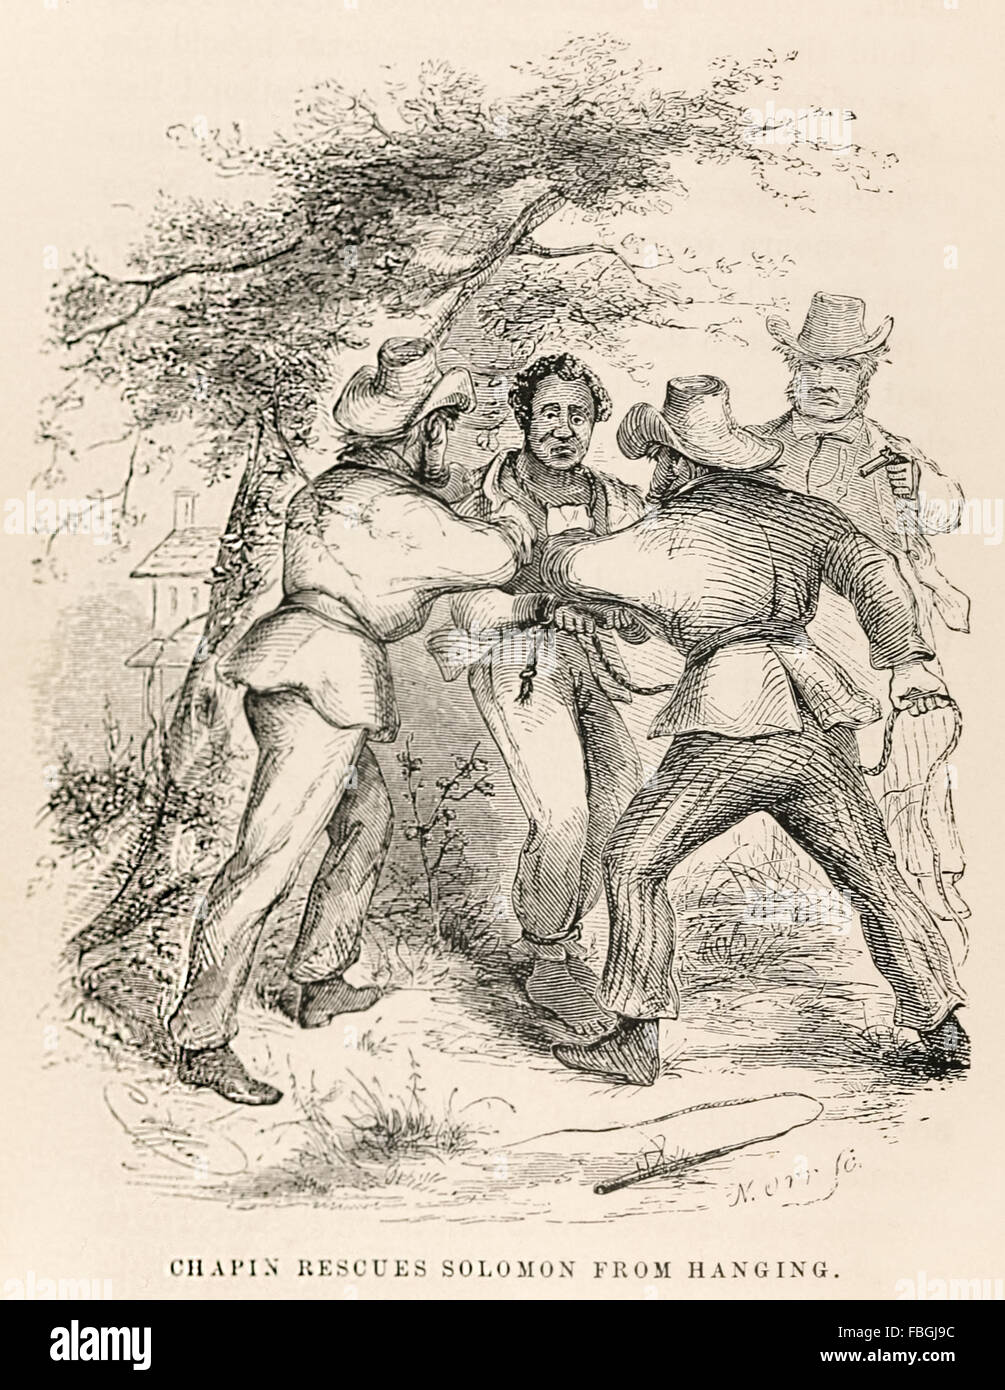 'Chapin rescues Solomon from hanging.' from 'Twelve Years a Slave or Solomon Northup, a citizen of New York' published in 1853. The book recounts the author's experience as a free-born African American from New York being kidnapped and sold as a slave and forced to work 12 years on a cotton plantation in Louisiana. He managed to get word to family through a Canadian staying on the plantation and regained his freedom. He went on to became active in the abolitionist movement. See description for more information. Stock Photo